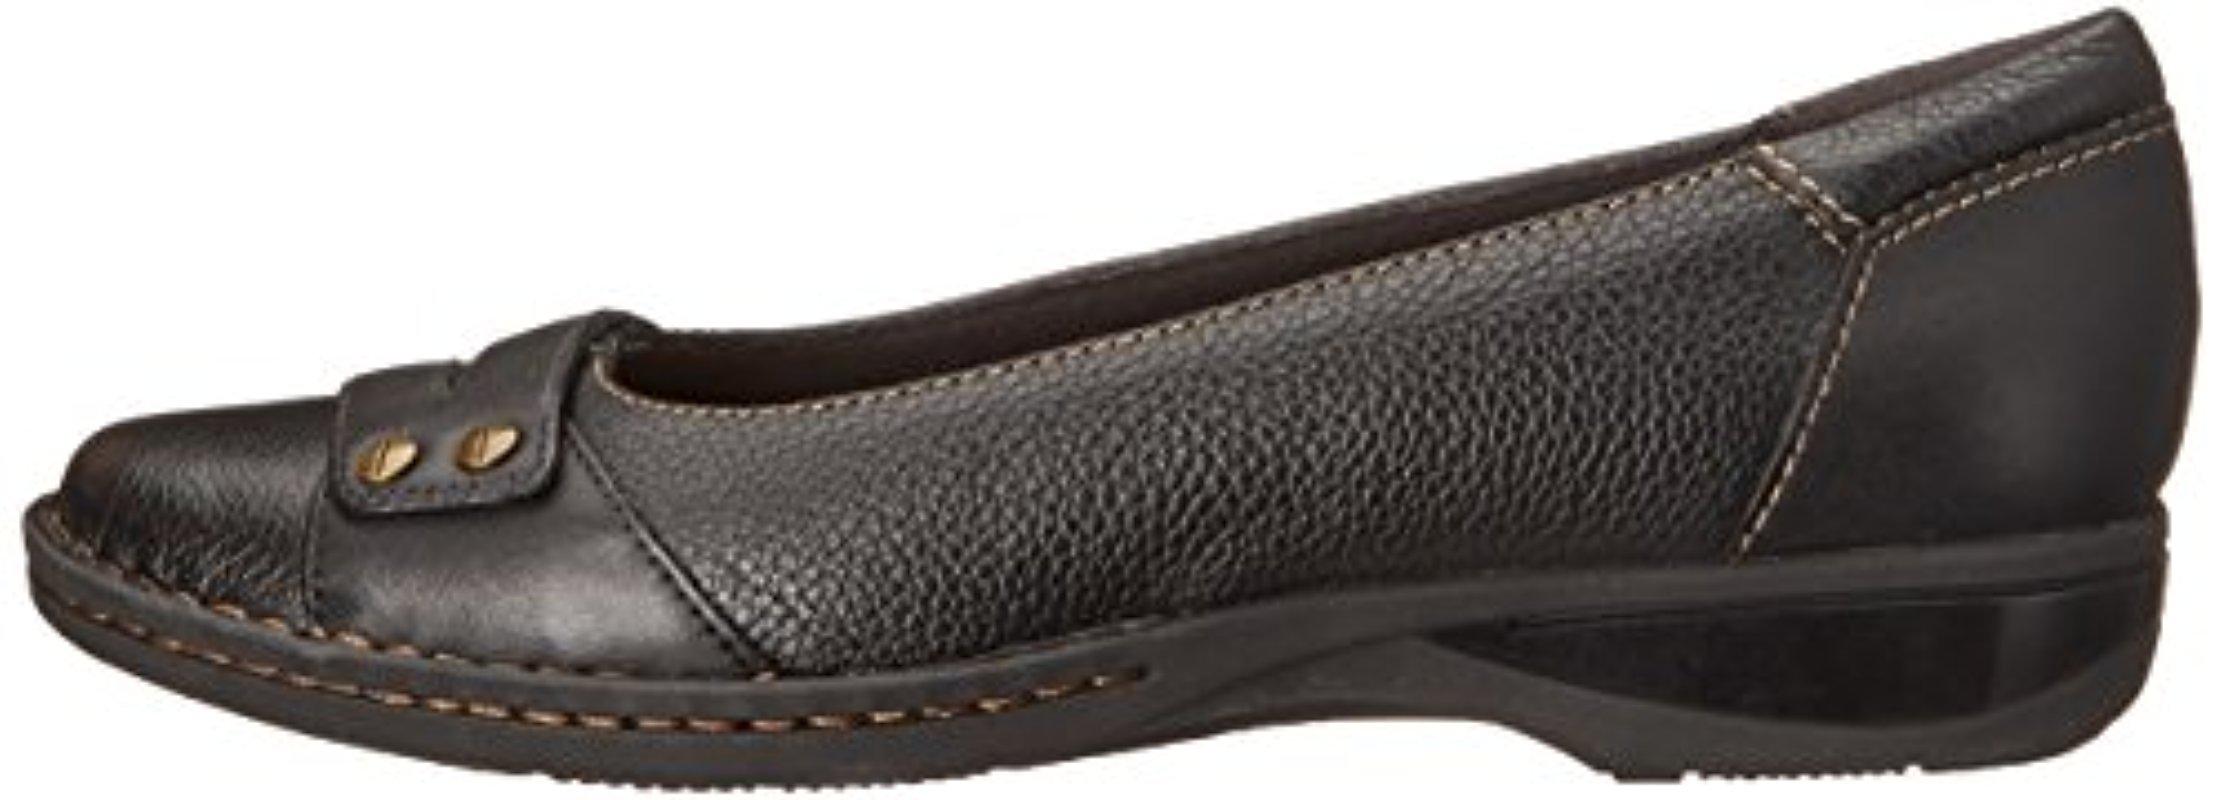 Clarks Leather Pegg Abbie Flat in Black Leather (Black) - Lyst